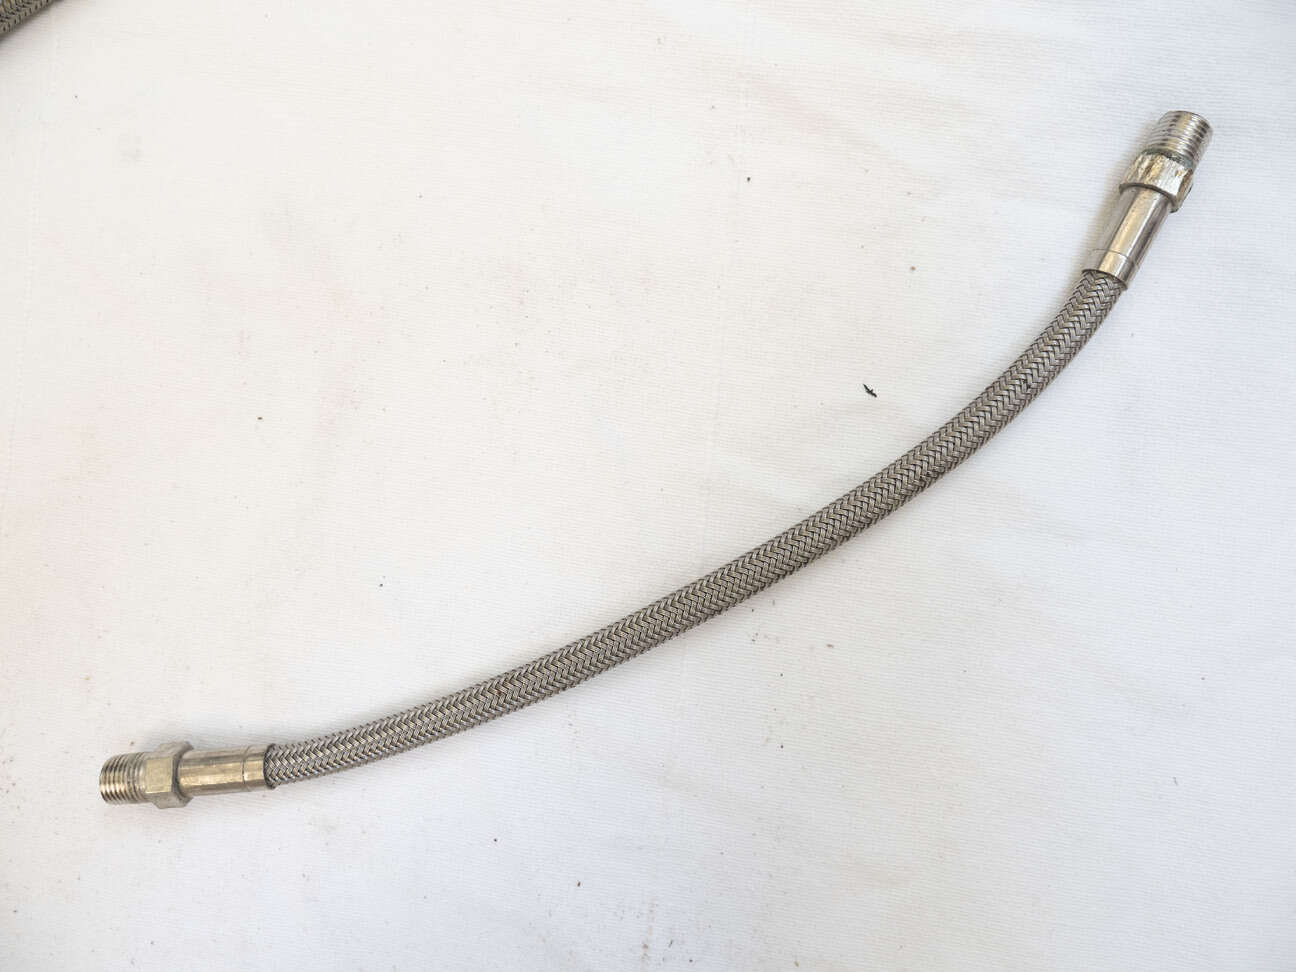 9.75” steel braided hose, used shape with lots of wrench marks